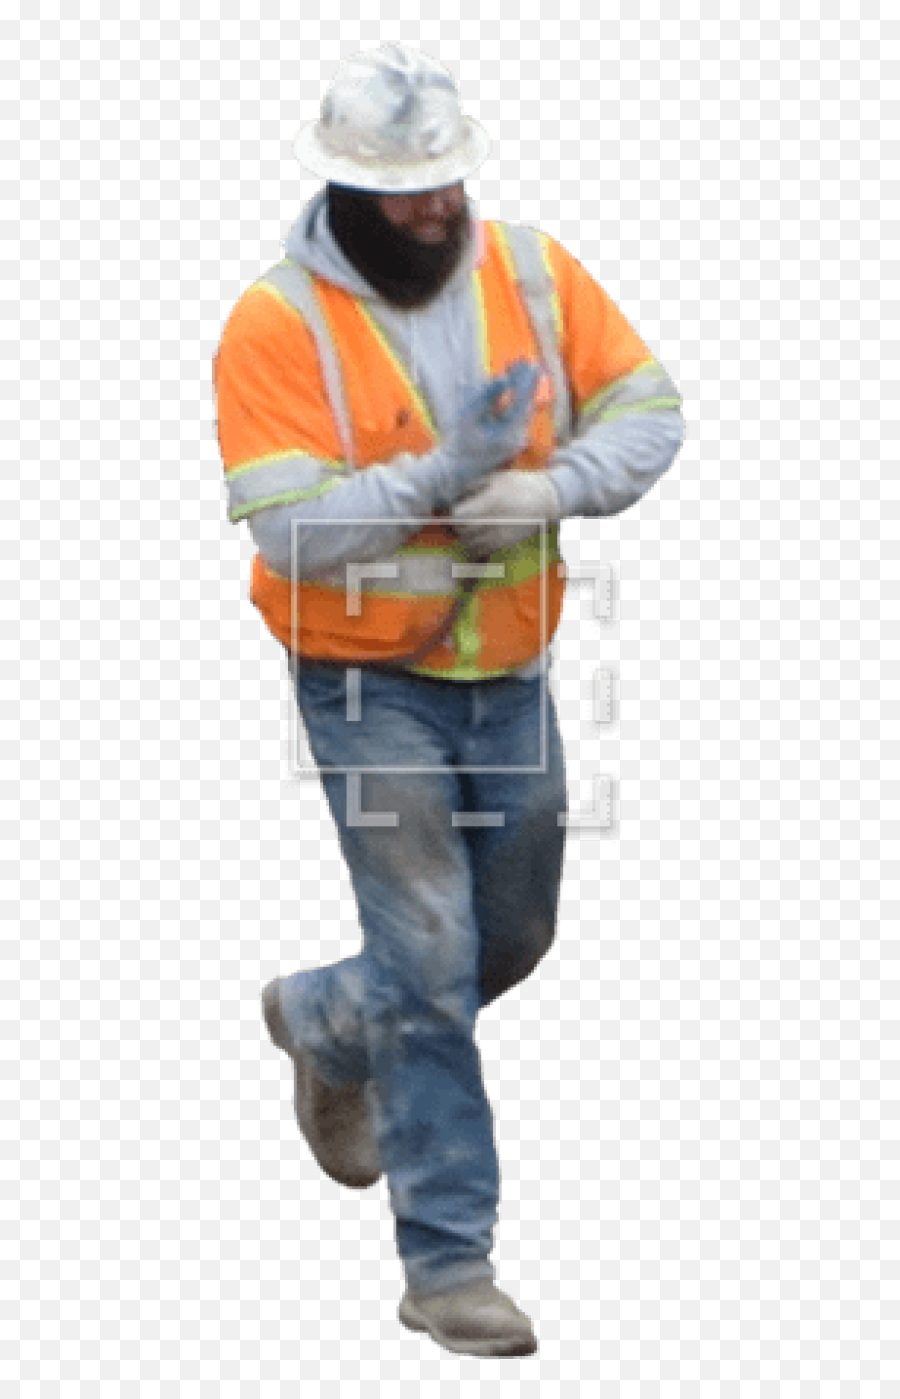 Free Png Download Construction Worker Png Images Background - Workwear Emoji,Construction Worker Png